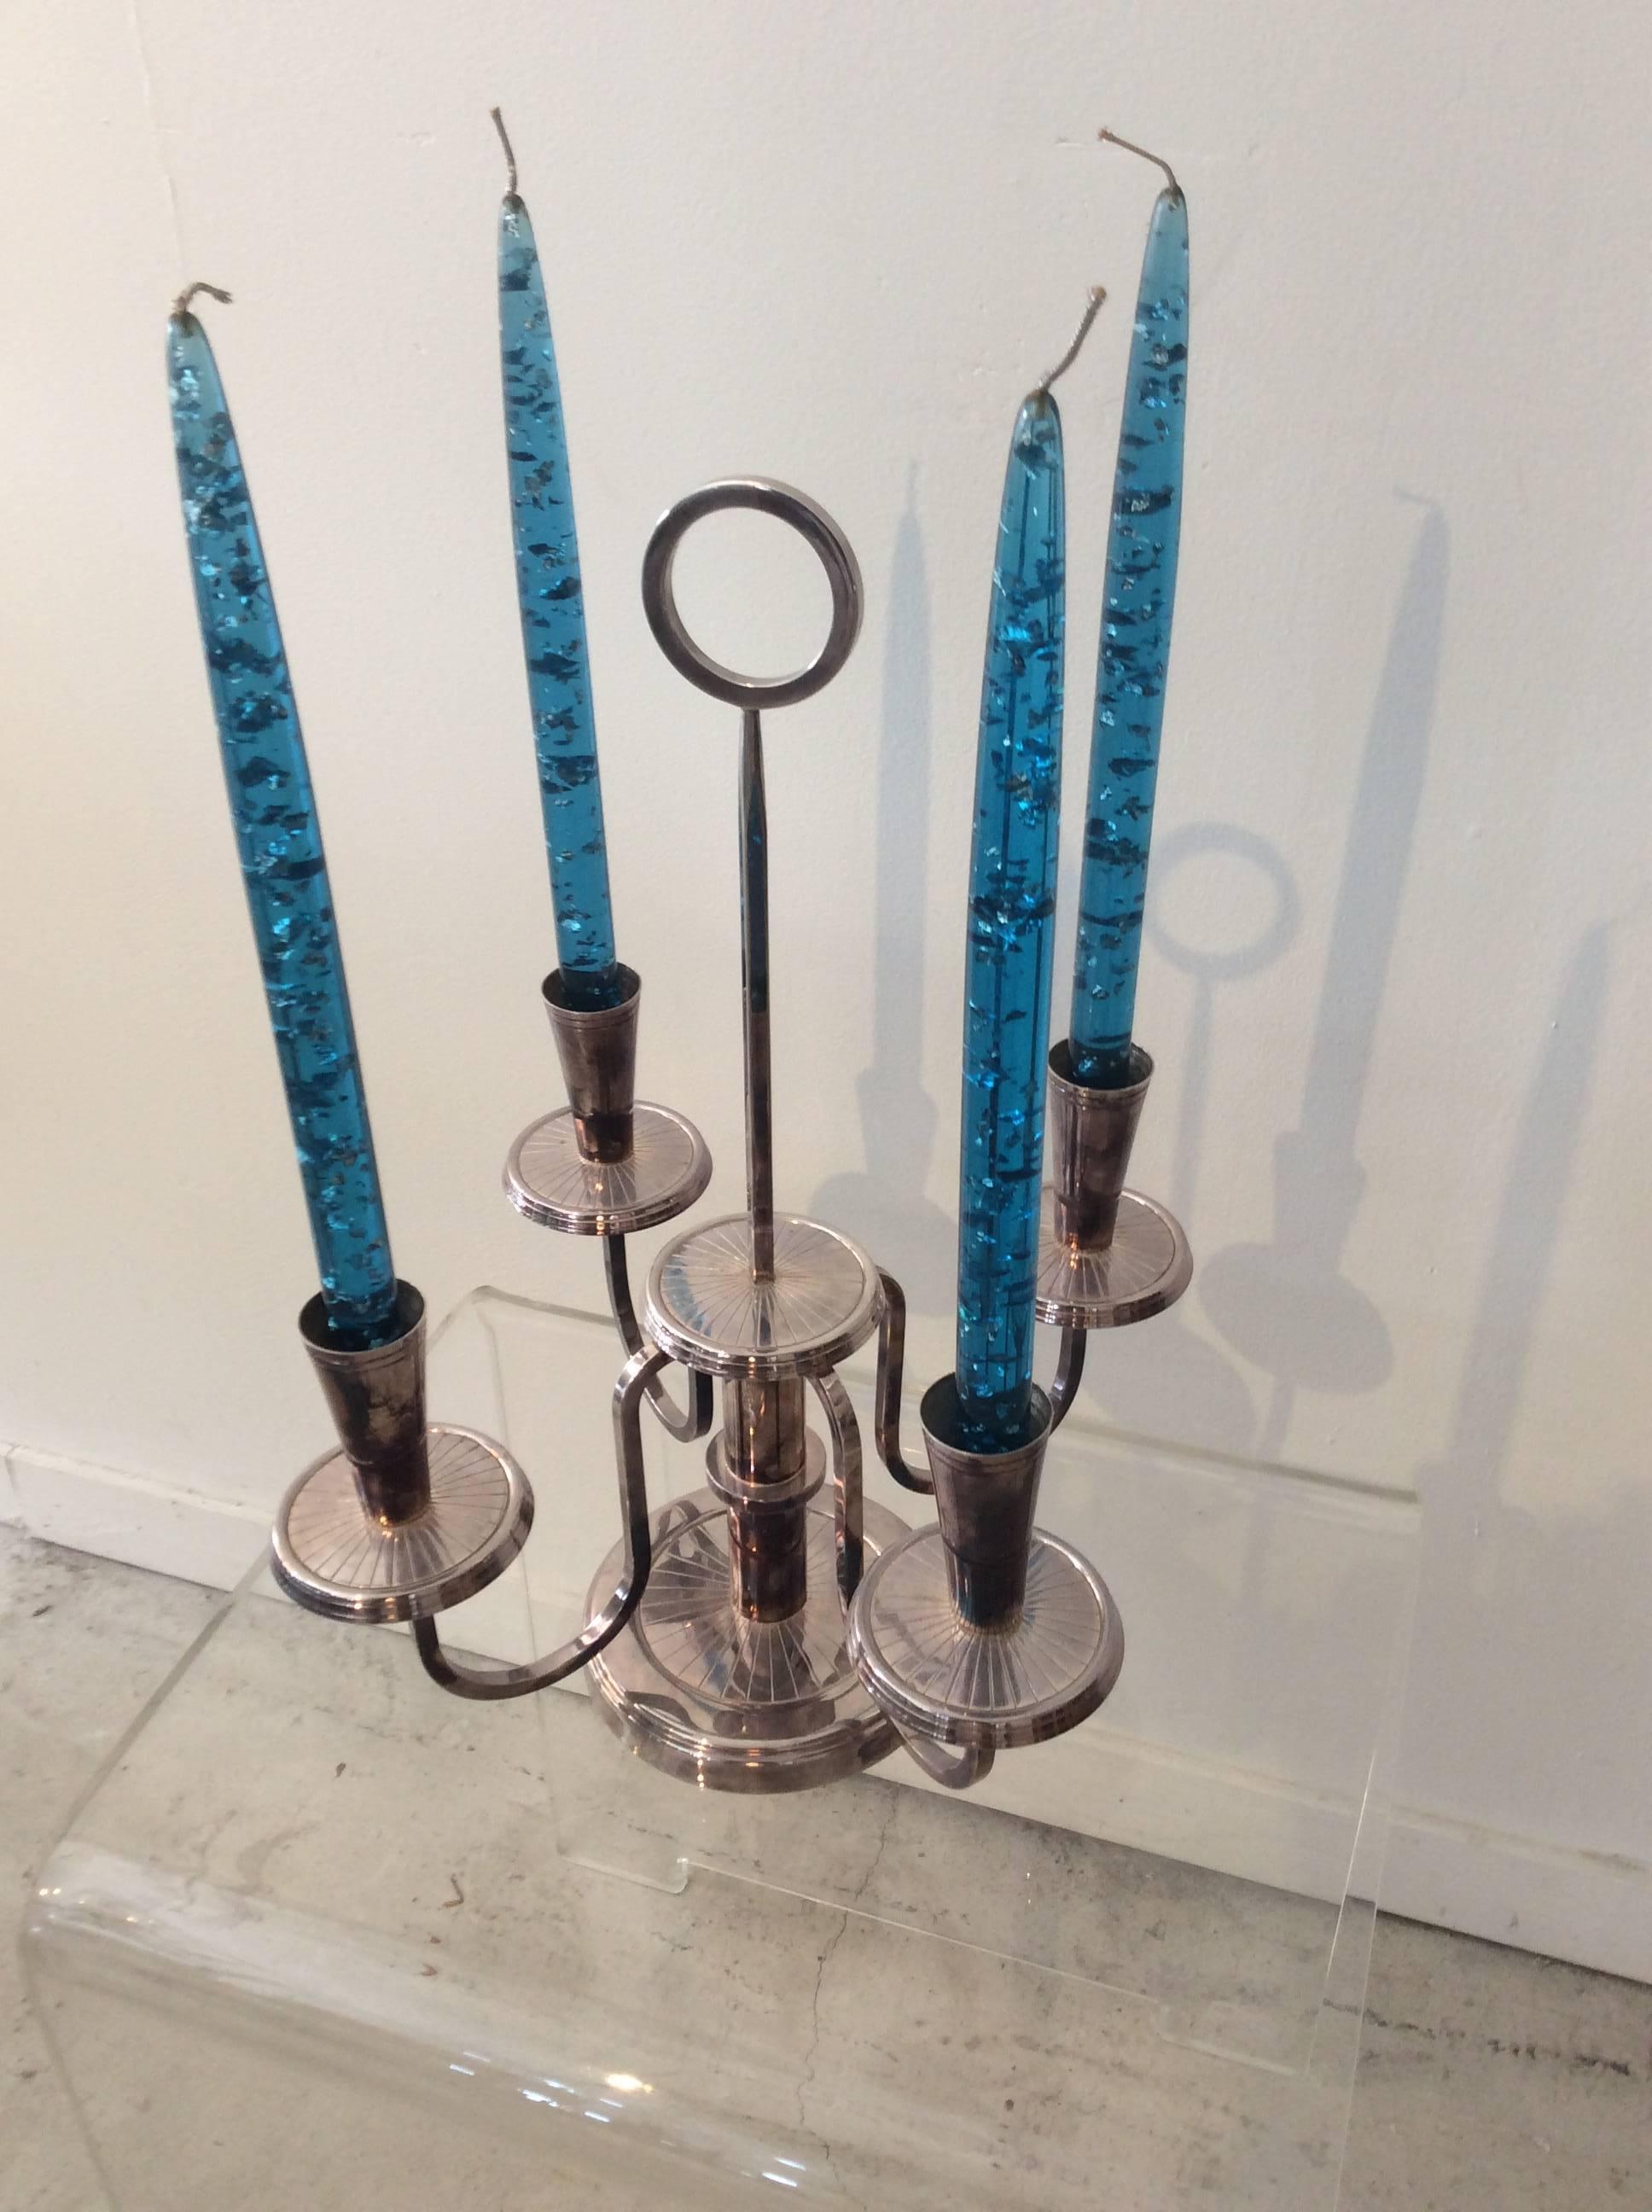 You are looking at a Classic silver plated candelabra by Georges Briard called 